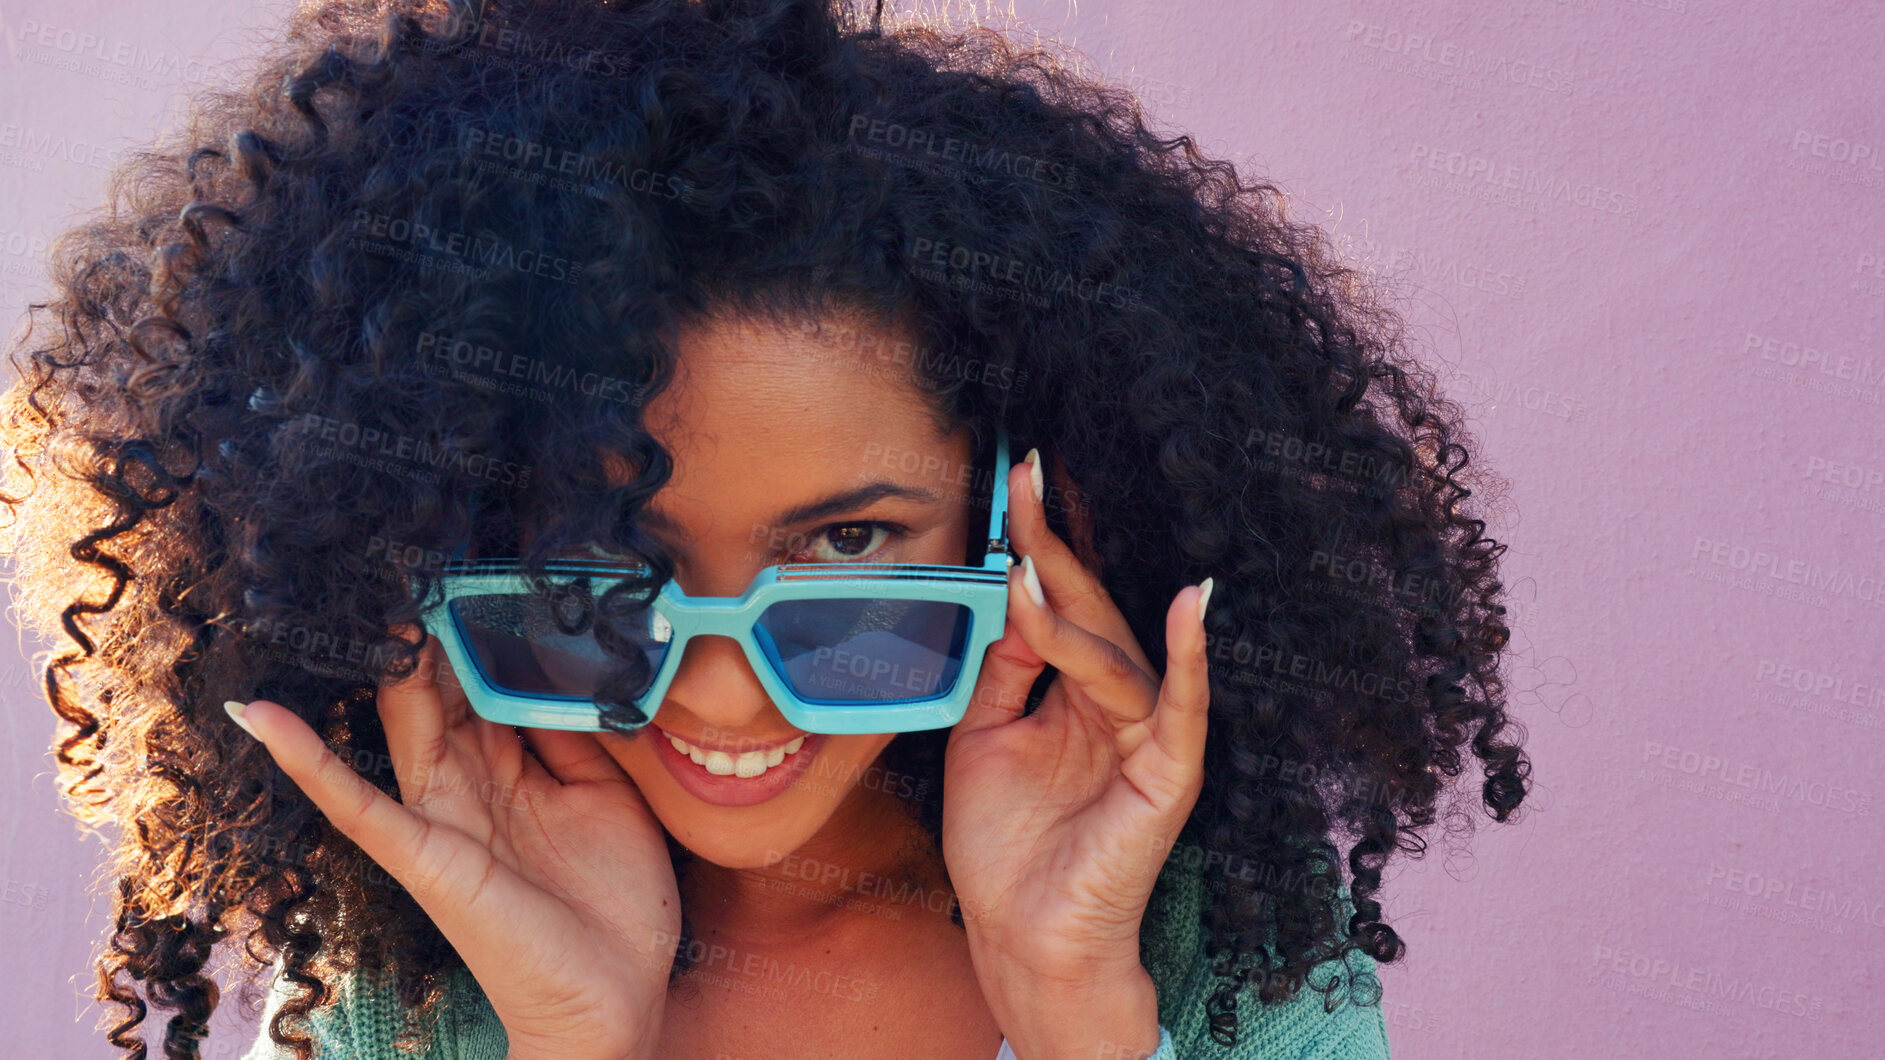 Buy stock photo Black woman, natural hair and happy portrait with smile on pink background  by wall with freedom. Fashion, fun and trendy sunglasses with outfit of person with afro hairstyle outdoor with fresh look